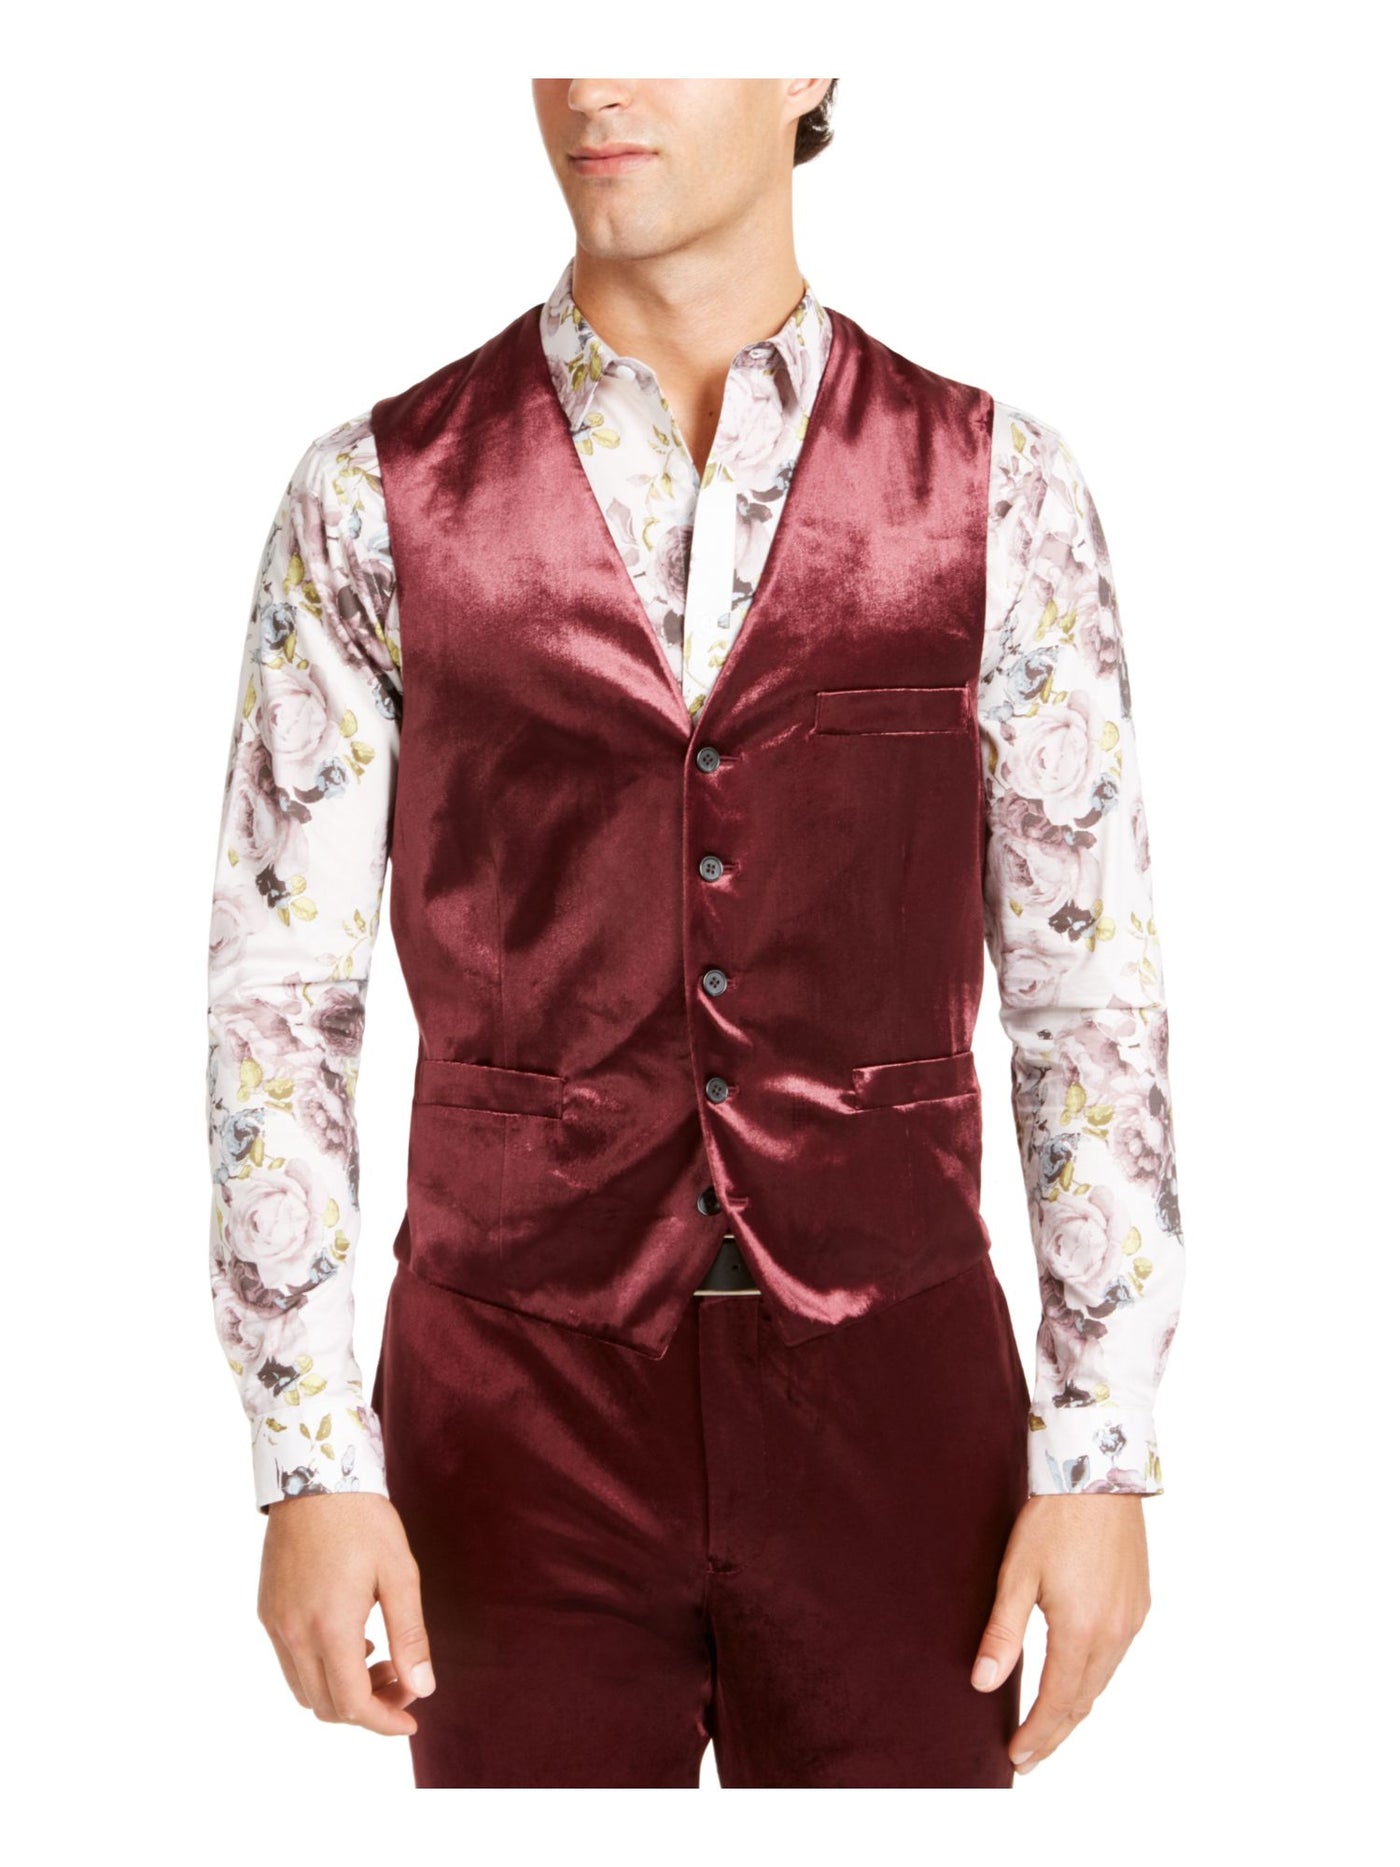 INC Mens Burgundy Belted, Single Breasted, Slim Fit Suit Separate Blazer Jacket 4XL Tall